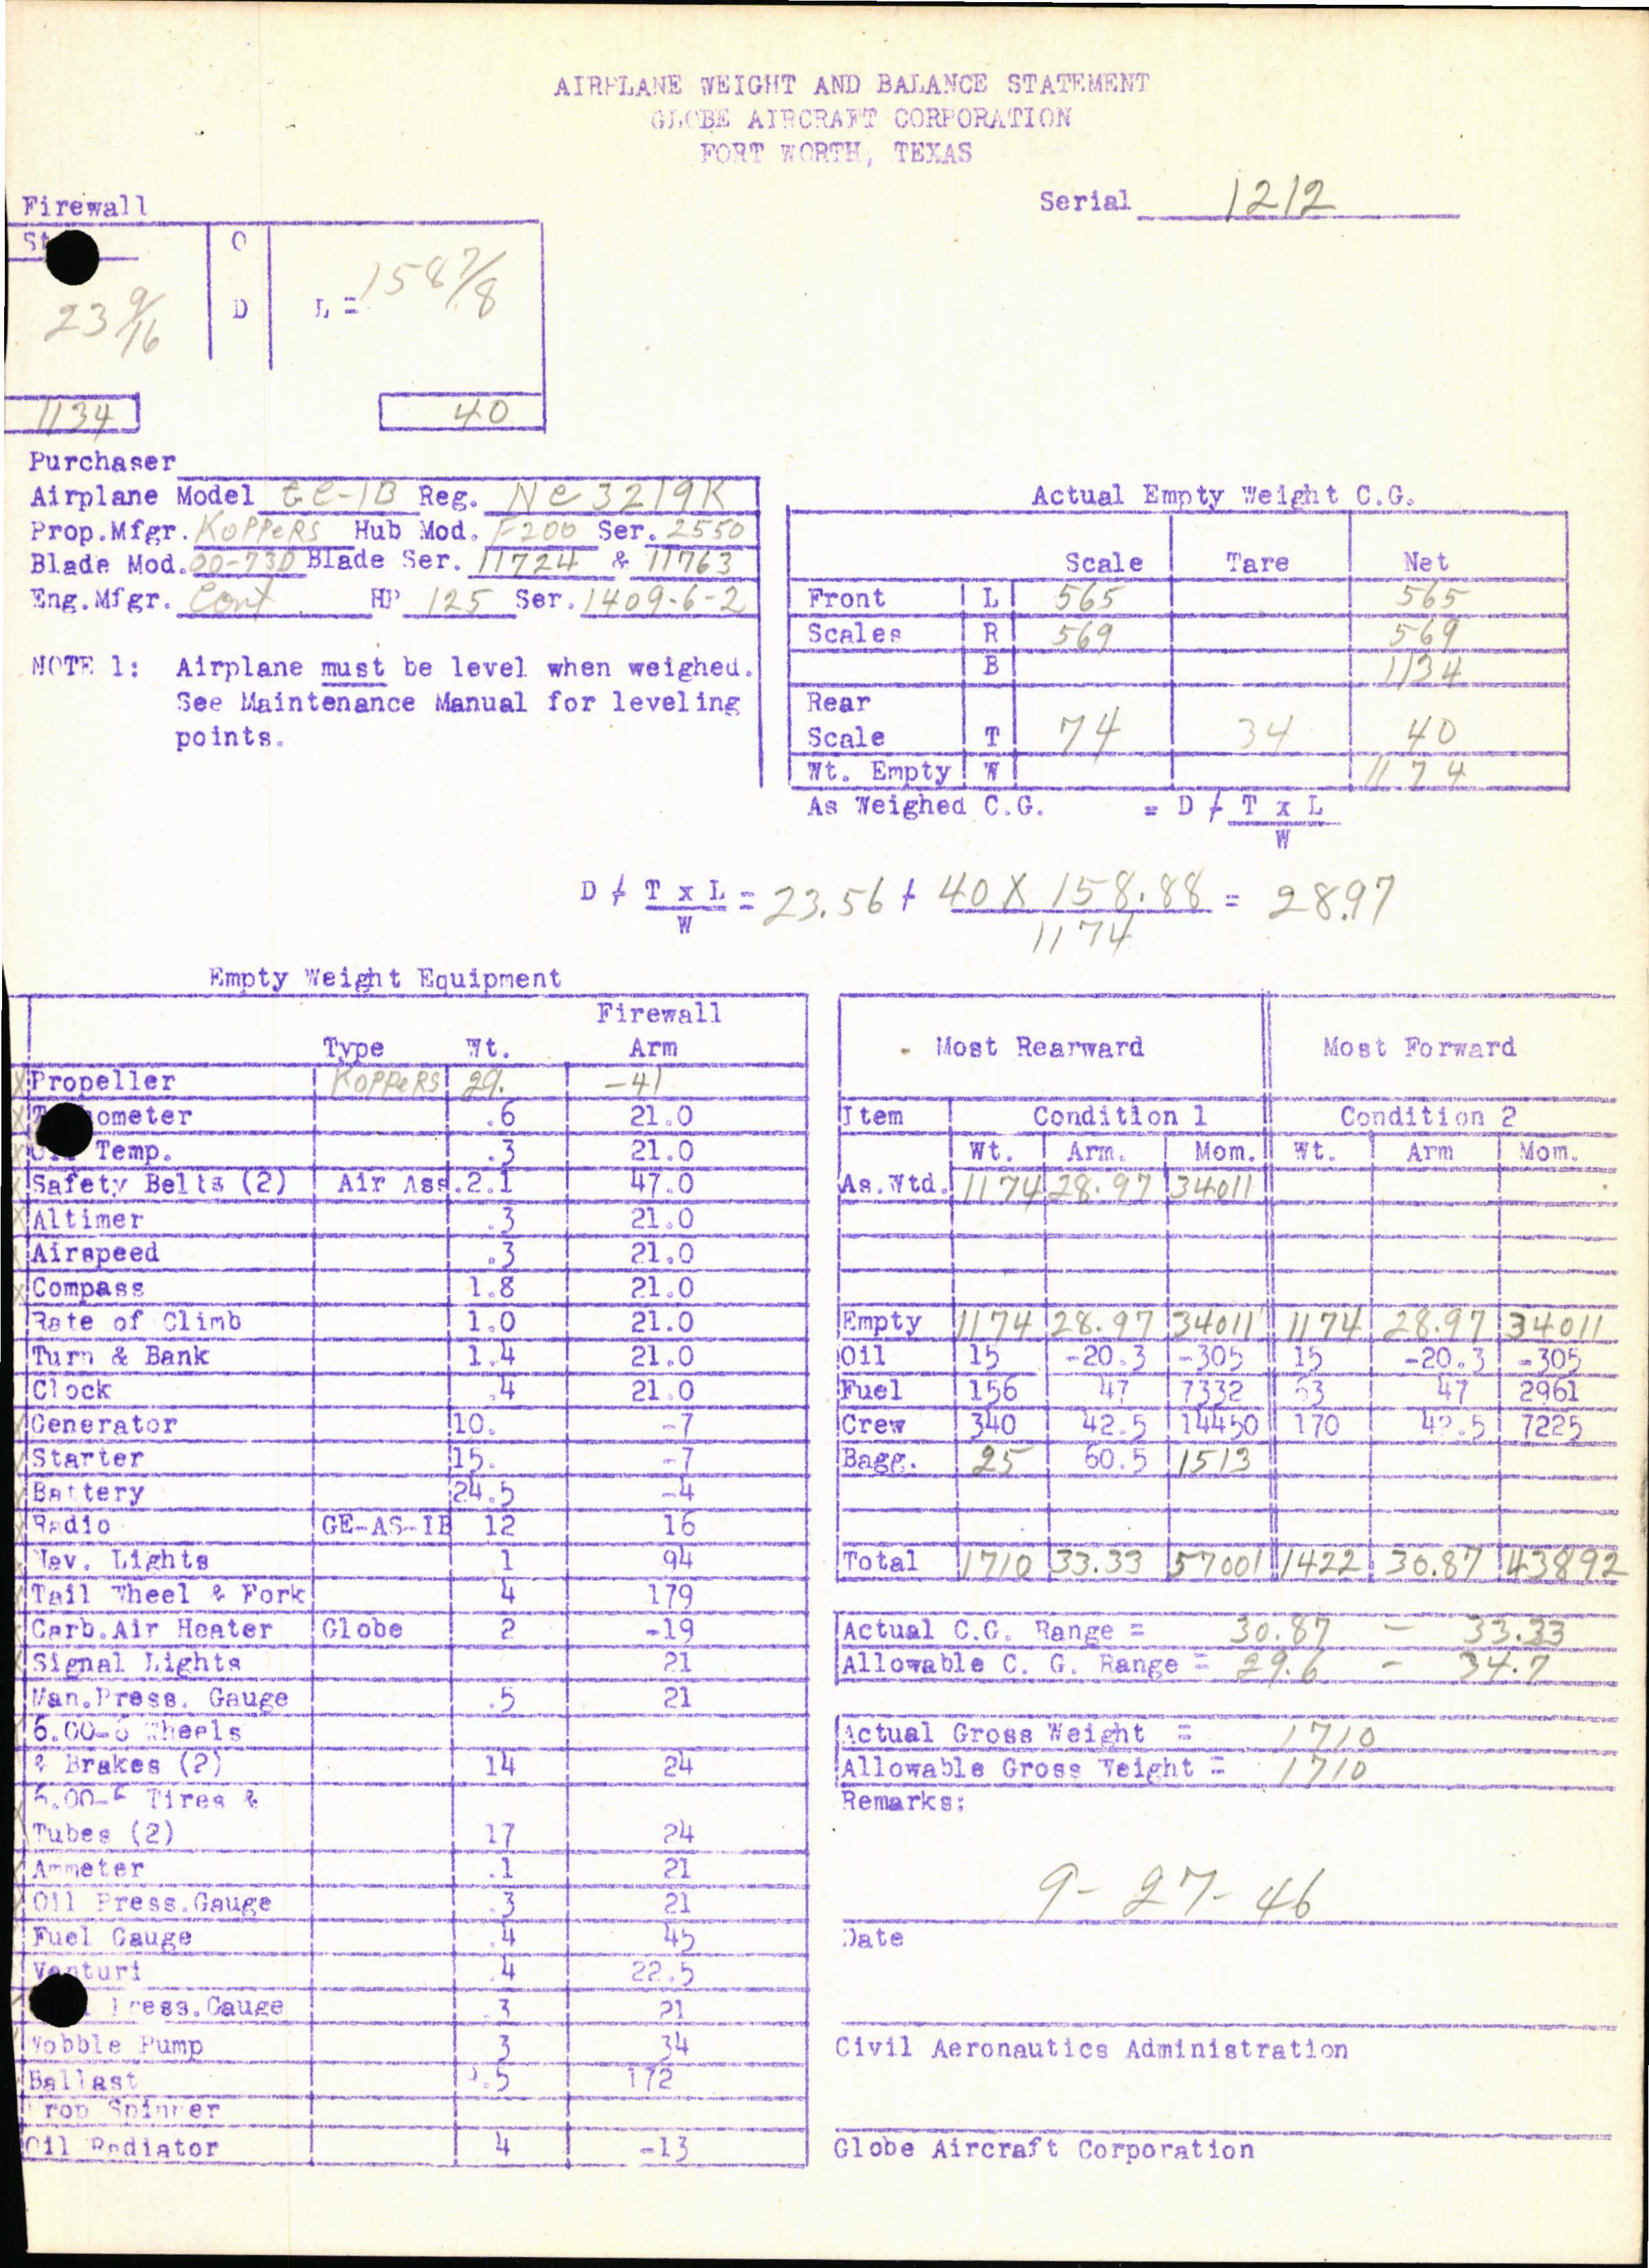 Sample page 7 from AirCorps Library document: Technical Information for Serial Number 1212